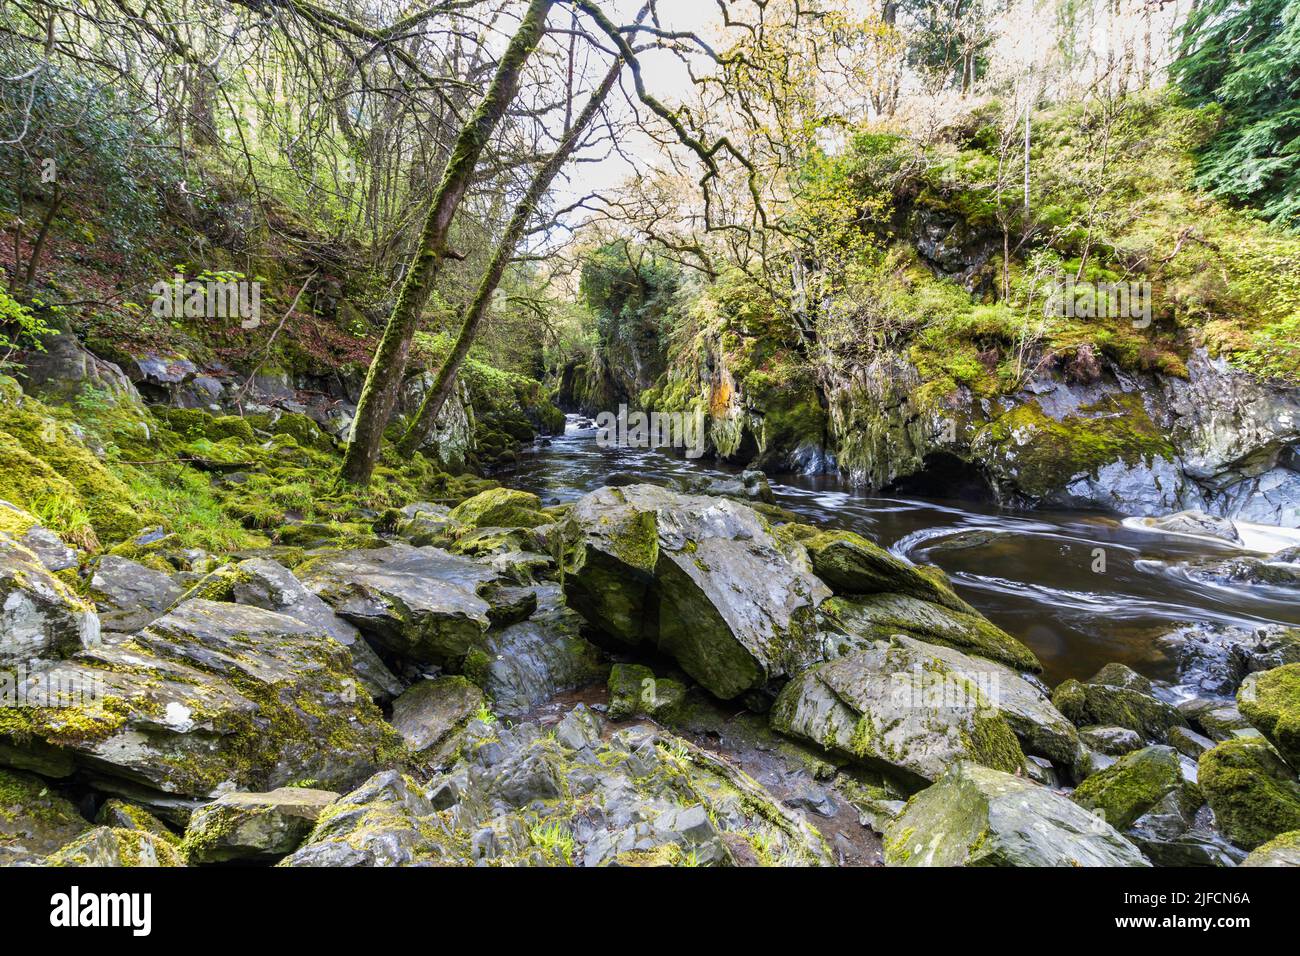 Beautiful Gorge with river The Fairy Glen, Betws-y-Coed, Snowdonia, Wales, UK, wide angle Stock Photo